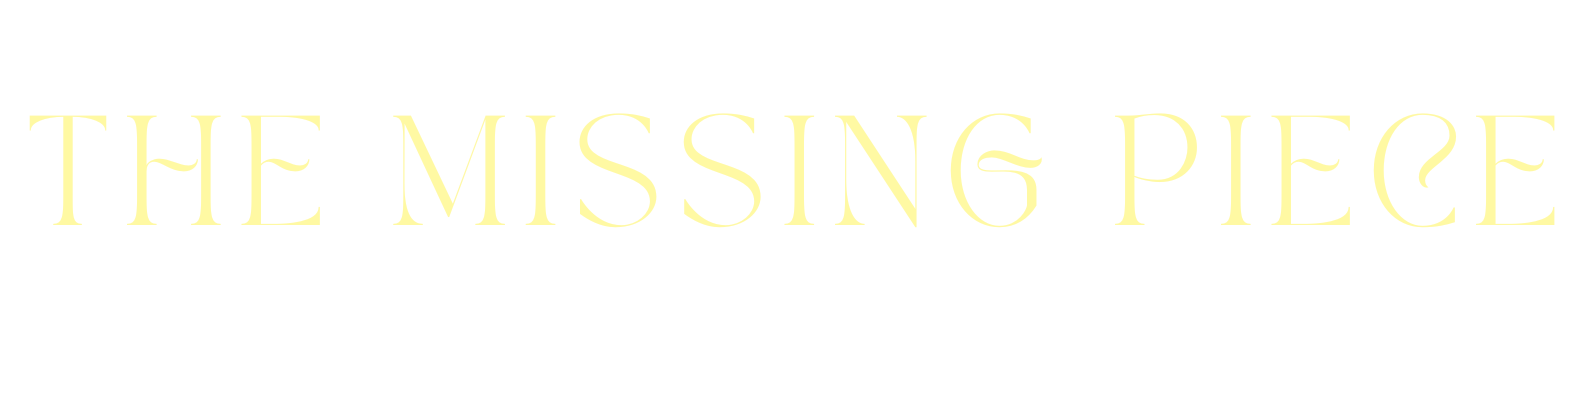 THE MISSING PIECE TITLE